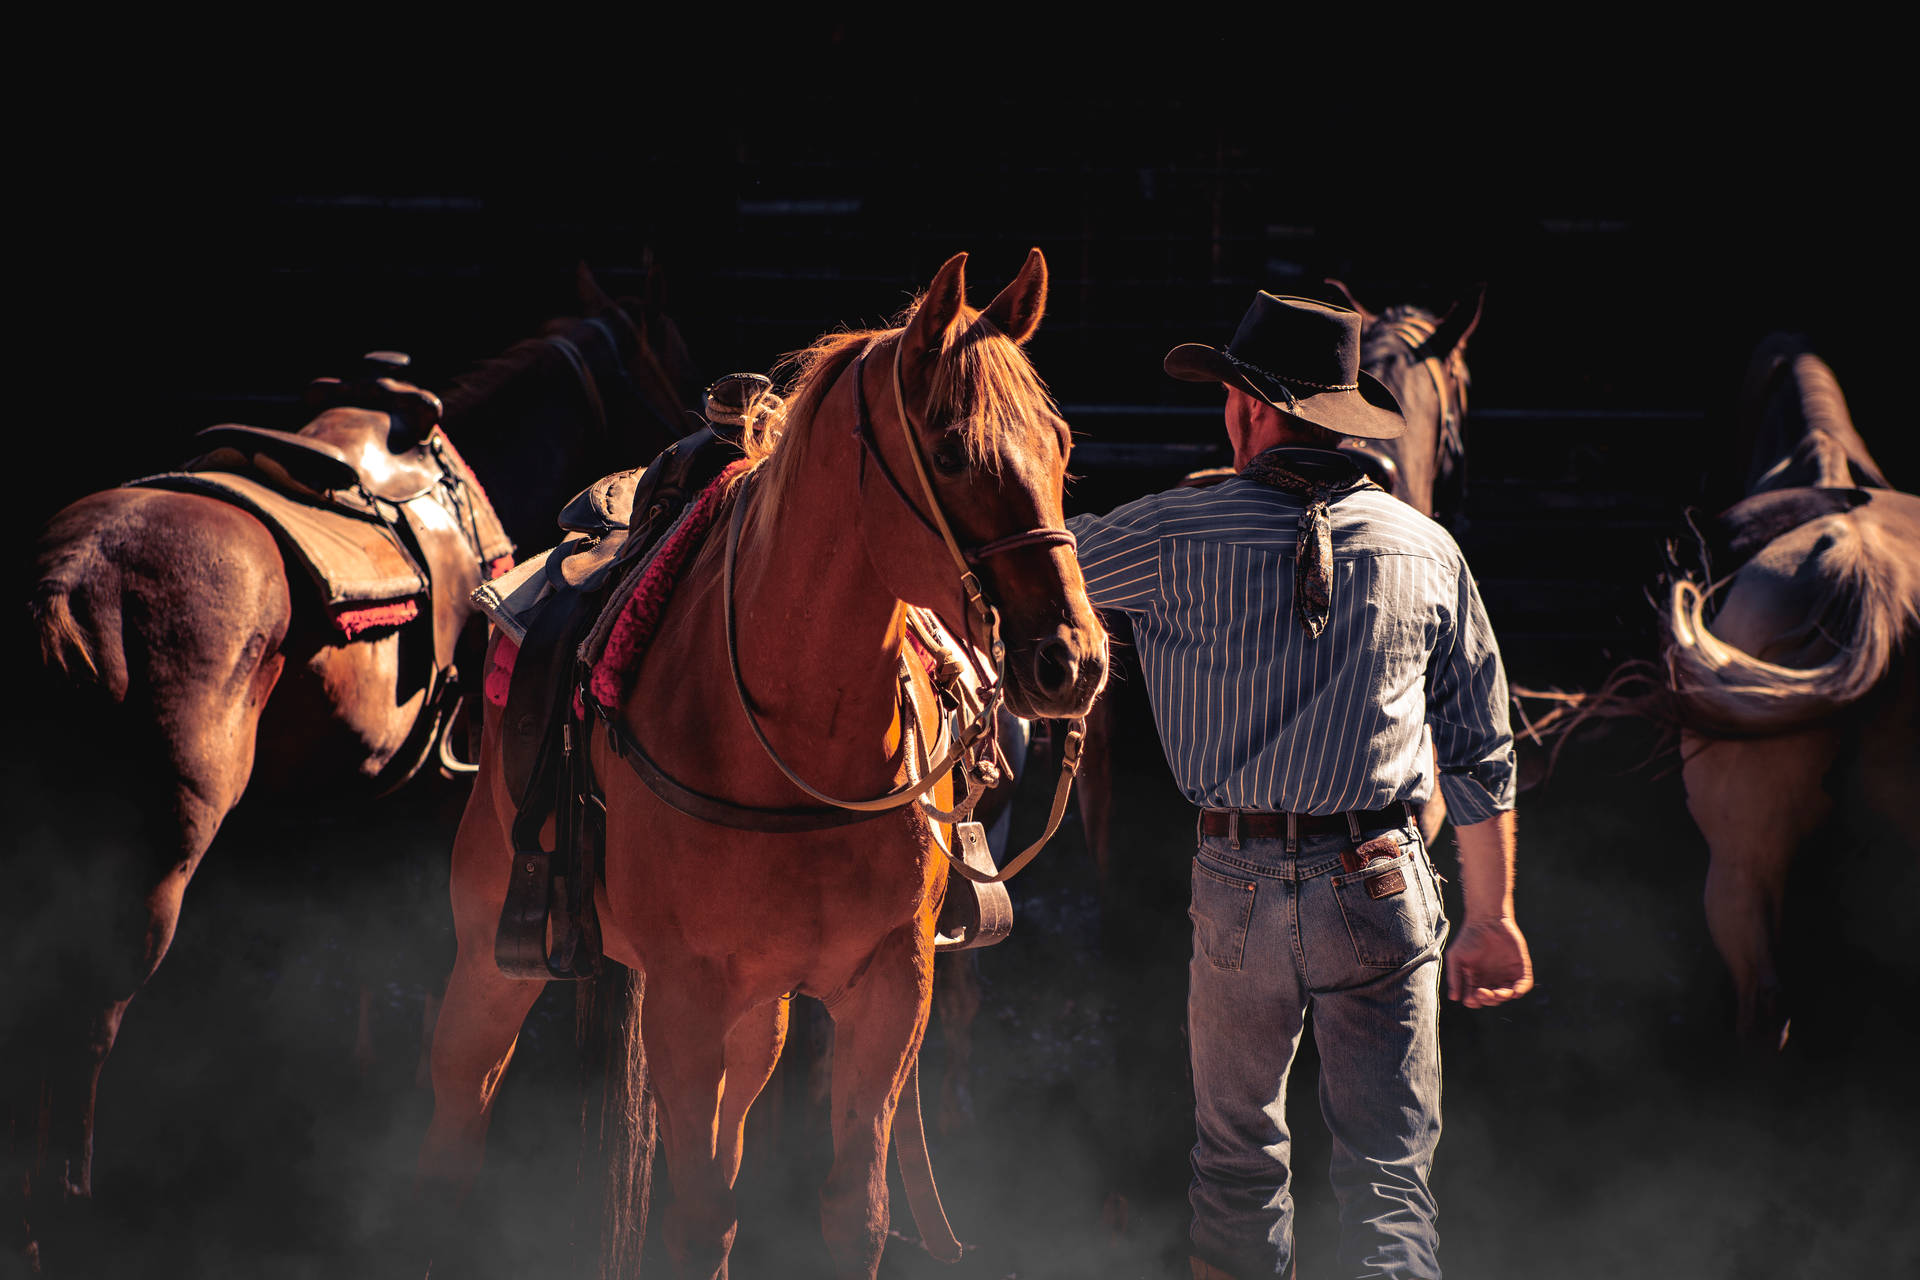 Cowboy 5616X3744 Wallpaper and Background Image